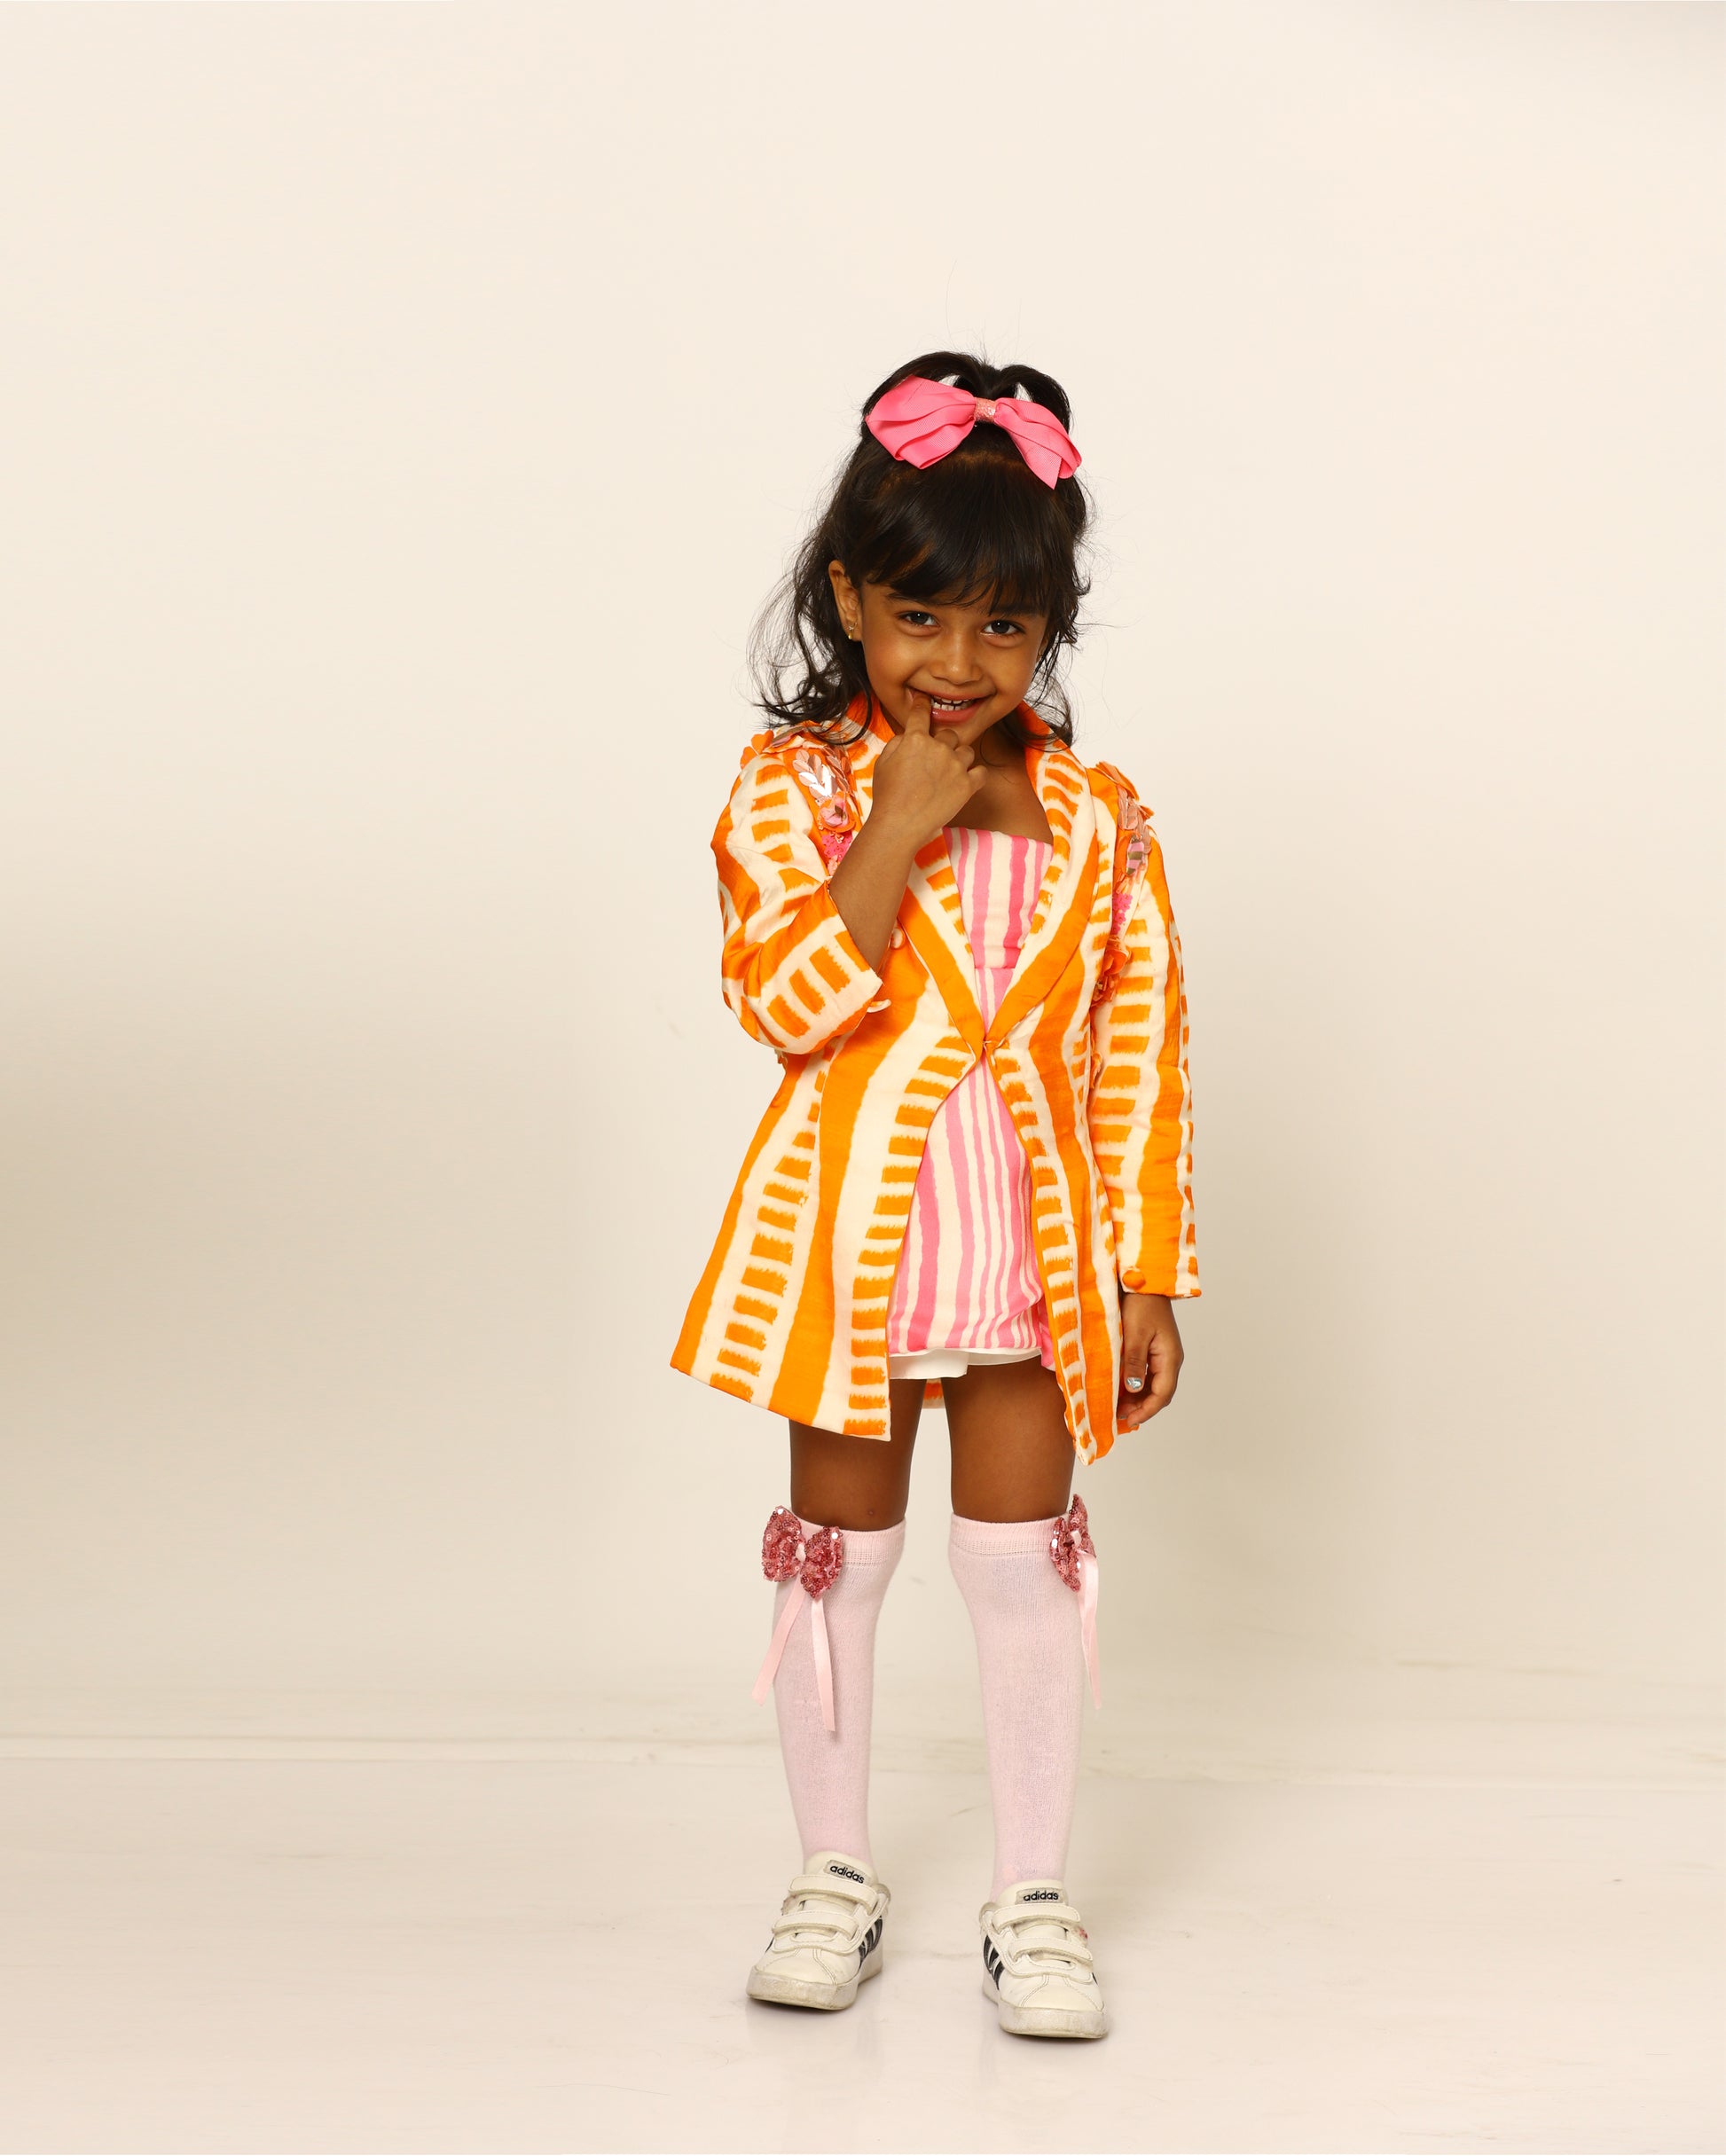 orange + candy + blazer + striped + flowers + pink + striped + skort + bow + socks + shoe + party + cheerful + jump + front